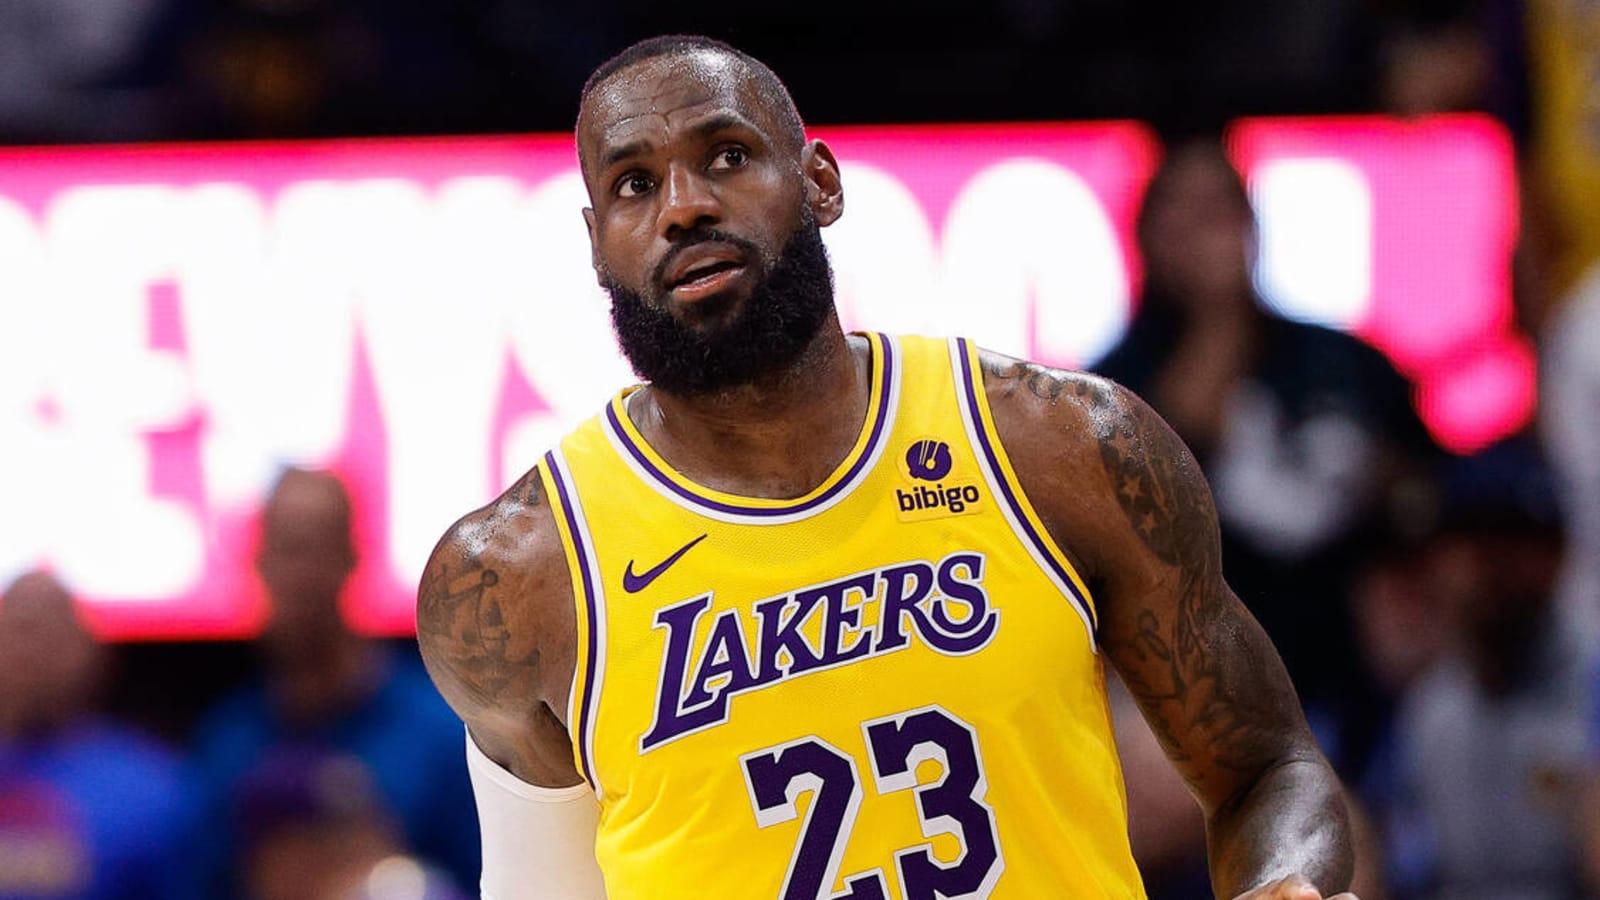 NBA insider says LeBron James likely to return to Lakers